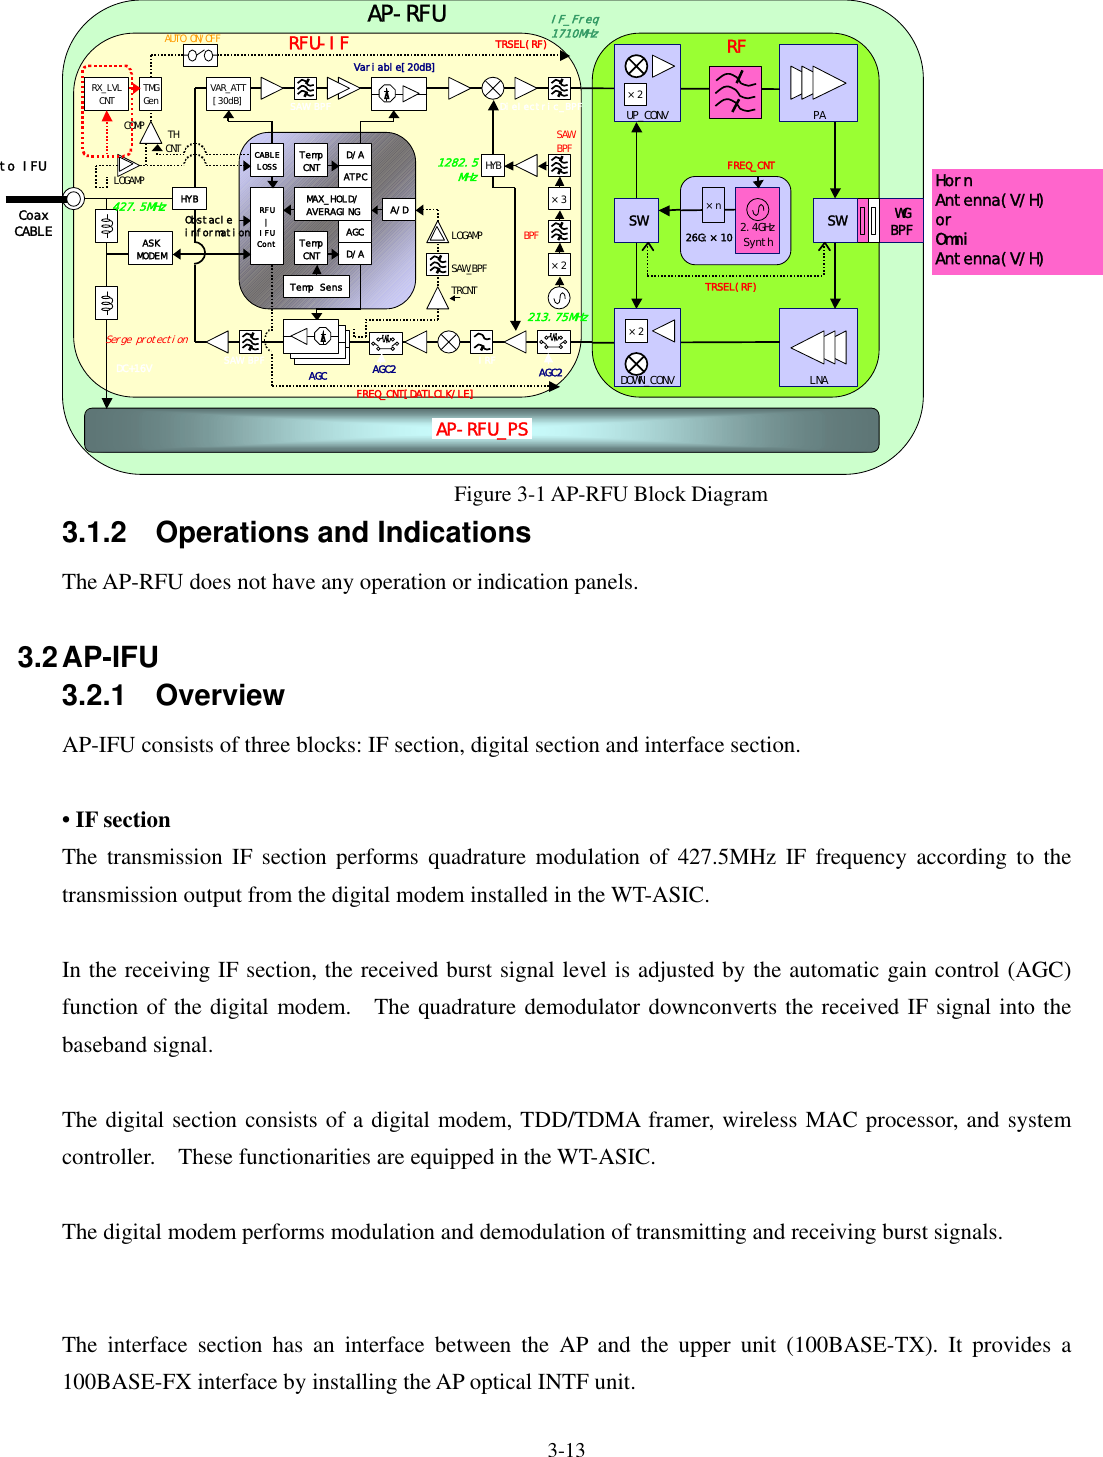  3-13    Figure 3-1 AP-RFU Block Diagram   3.1.2  Operations and Indications The AP-RFU does not have any operation or indication panels.  3.2 AP-IFU 3.2.1 Overview AP-IFU consists of three blocks: IF section, digital section and interface section.    • IF section The transmission IF section performs quadrature modulation of 427.5MHz IF frequency according to the transmission output from the digital modem installed in the WT-ASIC.      In the receiving IF section, the received burst signal level is adjusted by the automatic gain control (AGC) function of the digital modem.  The quadrature demodulator downconverts the received IF signal into the baseband signal.  The digital section consists of a digital modem, TDD/TDMA framer, wireless MAC processor, and system controller.    These functionarities are equipped in the WT-ASIC.   The digital modem performs modulation and demodulation of transmitting and receiving burst signals.   The interface section has an interface between the AP and the upper unit (100BASE-TX). It provides a 100BASE-FX interface by installing the AP optical INTF unit. to IFUAP-RFUWGBPFRFSWLNASW2.4GHzSynth26G:×10×n×2DOWN_CONVTRSEL(RF)PA×2UP_CONVFREQ_CNTIF部HYBASKMODEMTempCNT D/AD/AAGC×2HYB1282.5MHzATPCAGC213.75MHzMAX_HOLD/AVERAGING A/DTRCNTVariable[20dB]TempCNTRFU￨IFUContTemp SensVAR_ATT[30dB]CABLELOSSDC+16VLOGAMPTMGGenCOMP THCNTObstacleinformationTRSEL(RF)FREQ_CNT[DATLCLK/LE]427.5MHzSAW BPFIF_Freq1710MHzSAW BPFHornAntenna(V/H)orOmniAntenna(V/H)×3BPFSAWBPFIRFDielectric_BPFLOGAMPSAW_BPFAGC2RX_LVLCNTAUTO ON/OFFAGC2RFU-IFAP-RFU_PSSerge protectionCoaxCABLE